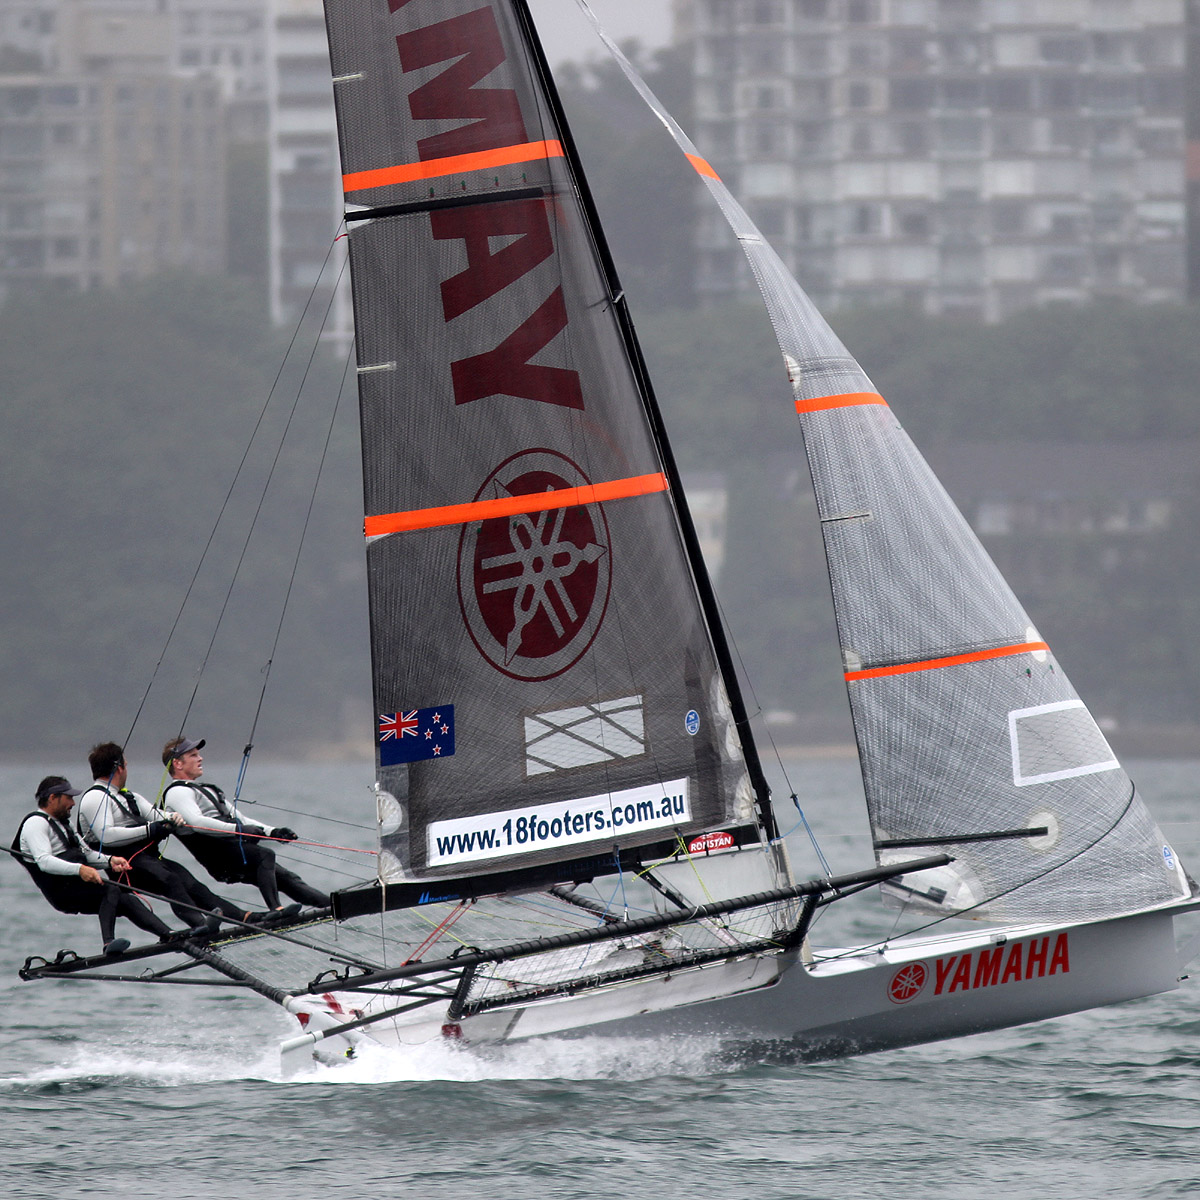 Yamaha at speed on the two-sail reach